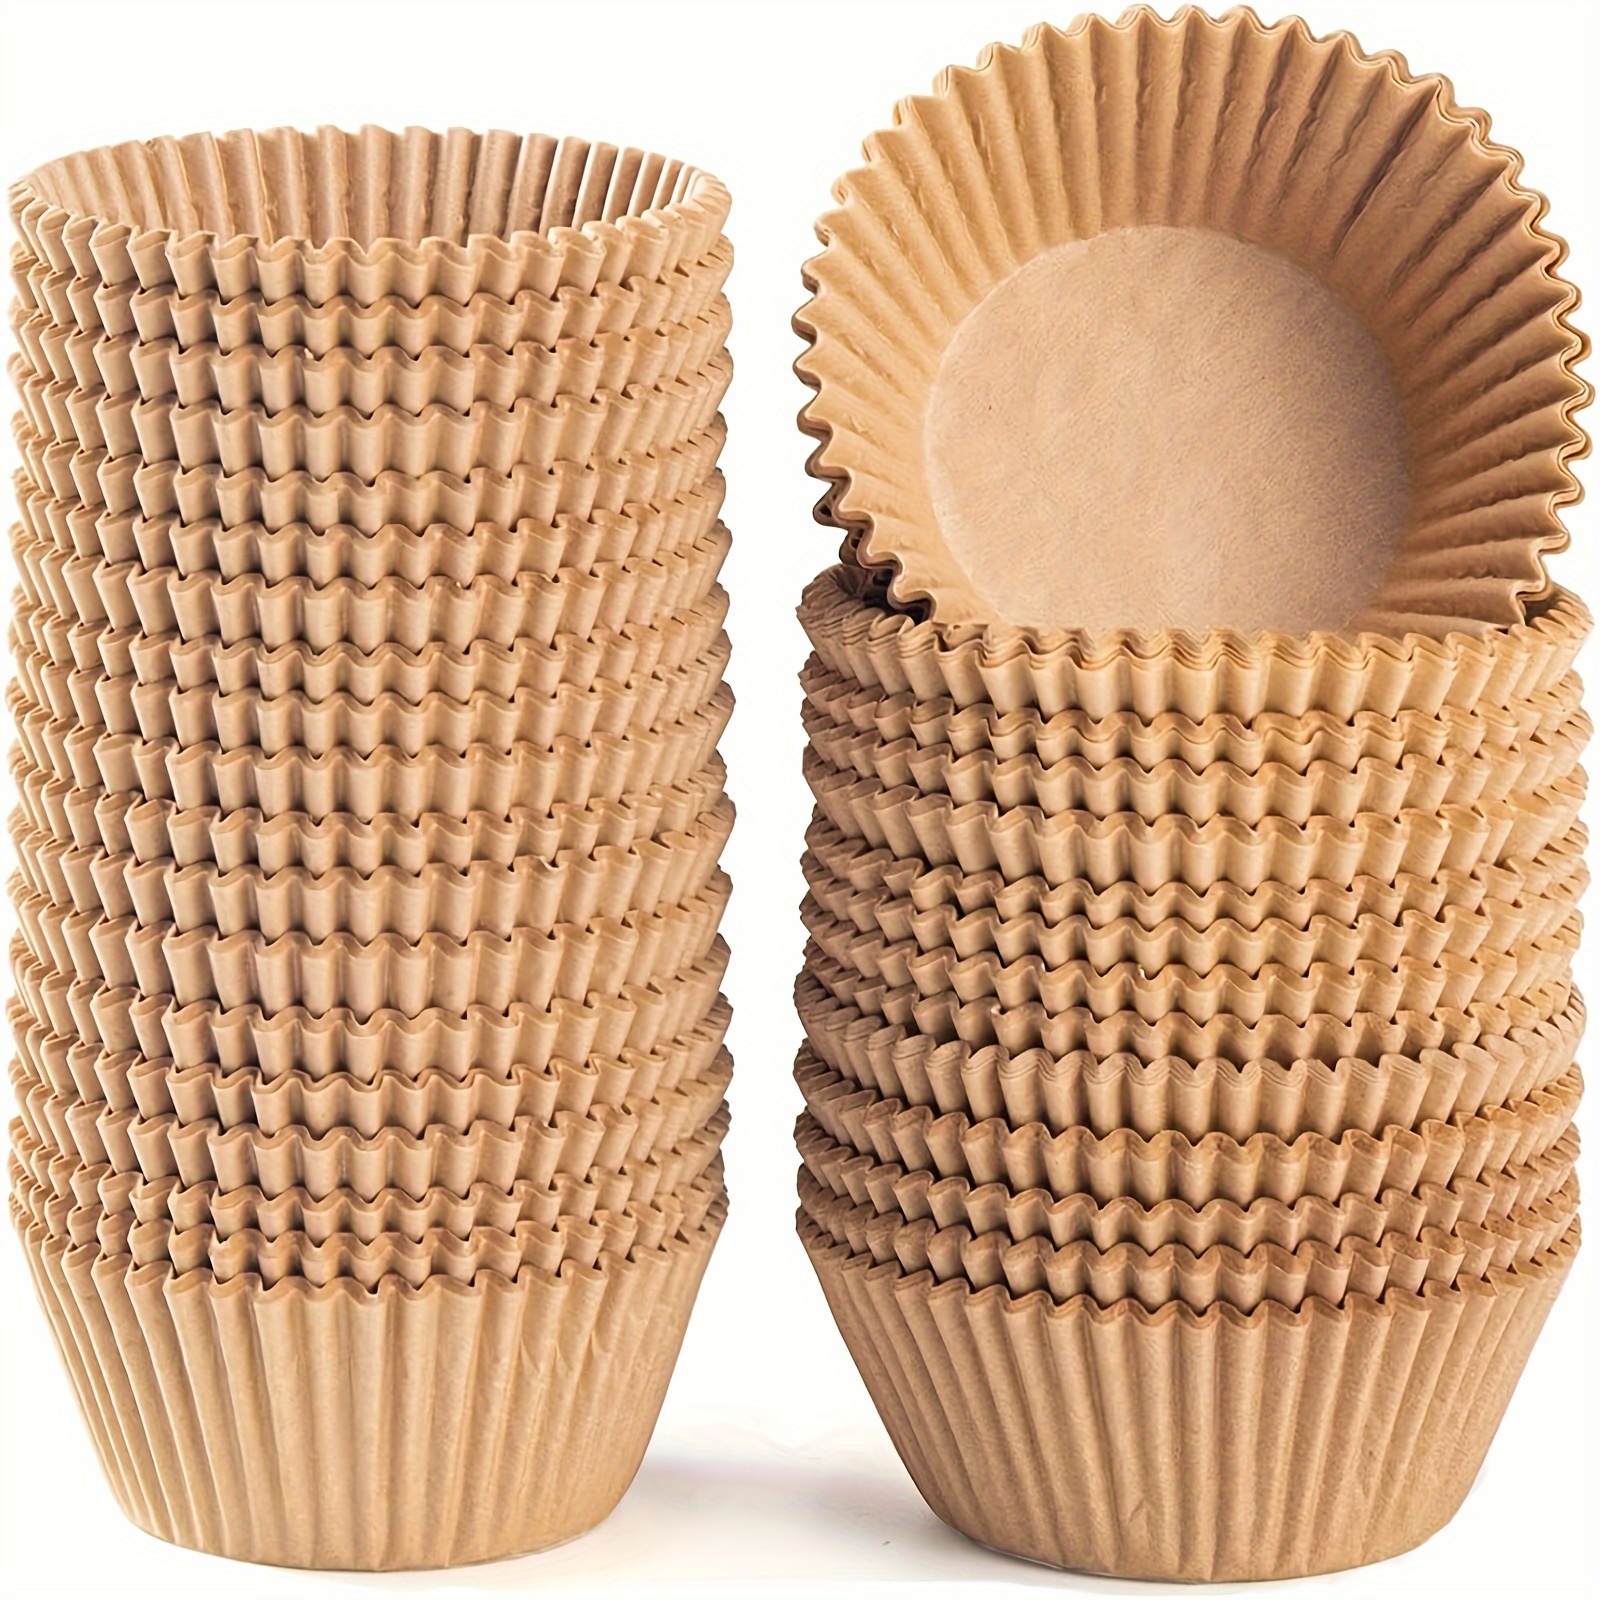 

200-pack Natural Paper Baking Cups 1.96 Inch Bottom Size Muffin Liners For Cupcakes And Desserts